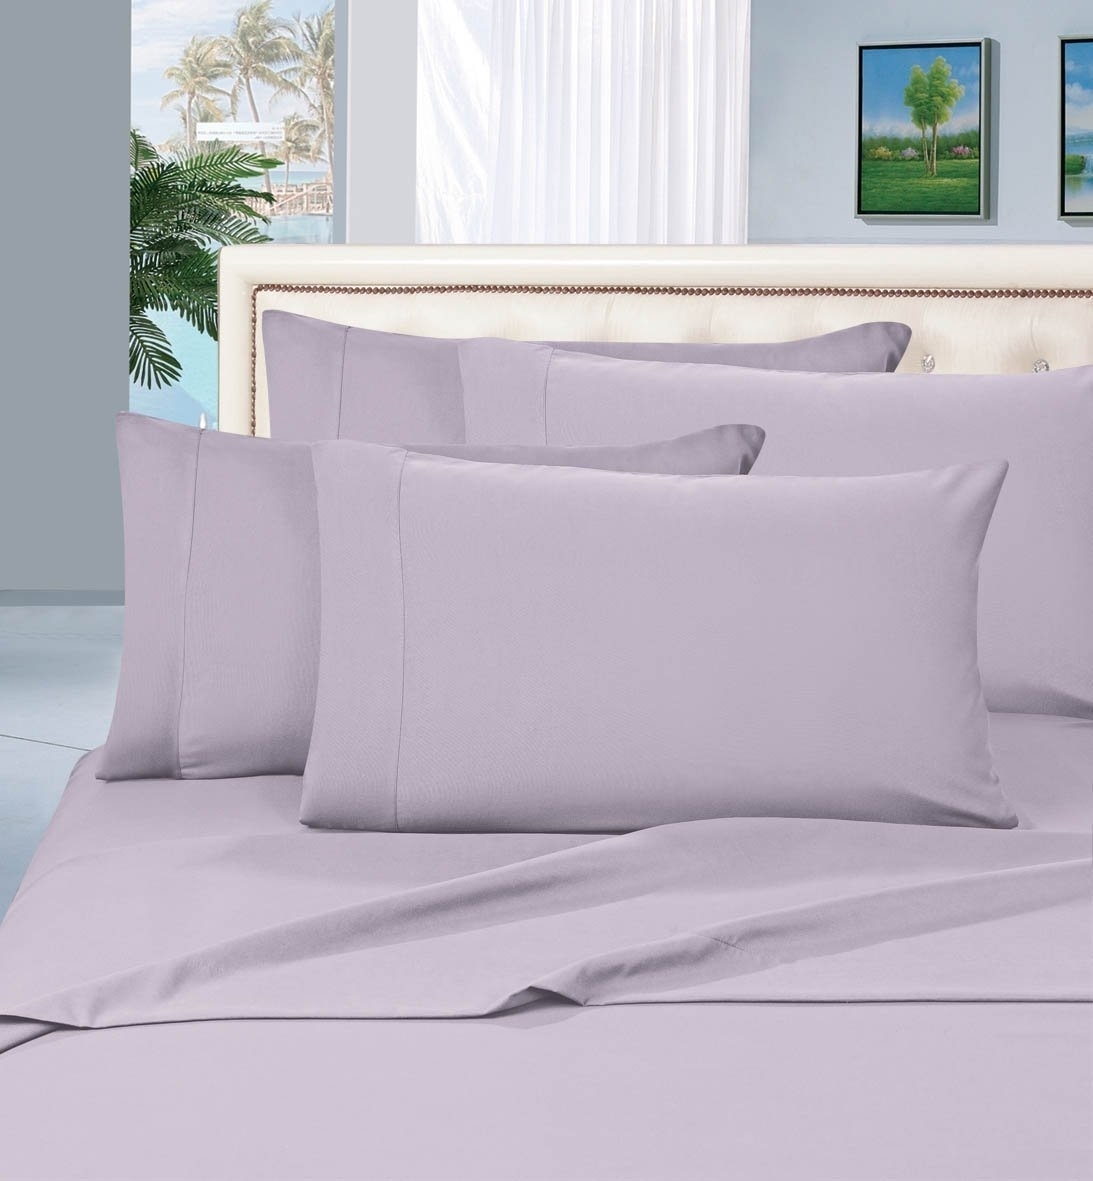 Elegant Comfort 1500 Series Wrinkle Resistant Egyptian Quality Hypoallergenic Ultra Soft Luxury 3-piece Bed Sheet Set, Twin, Lilac